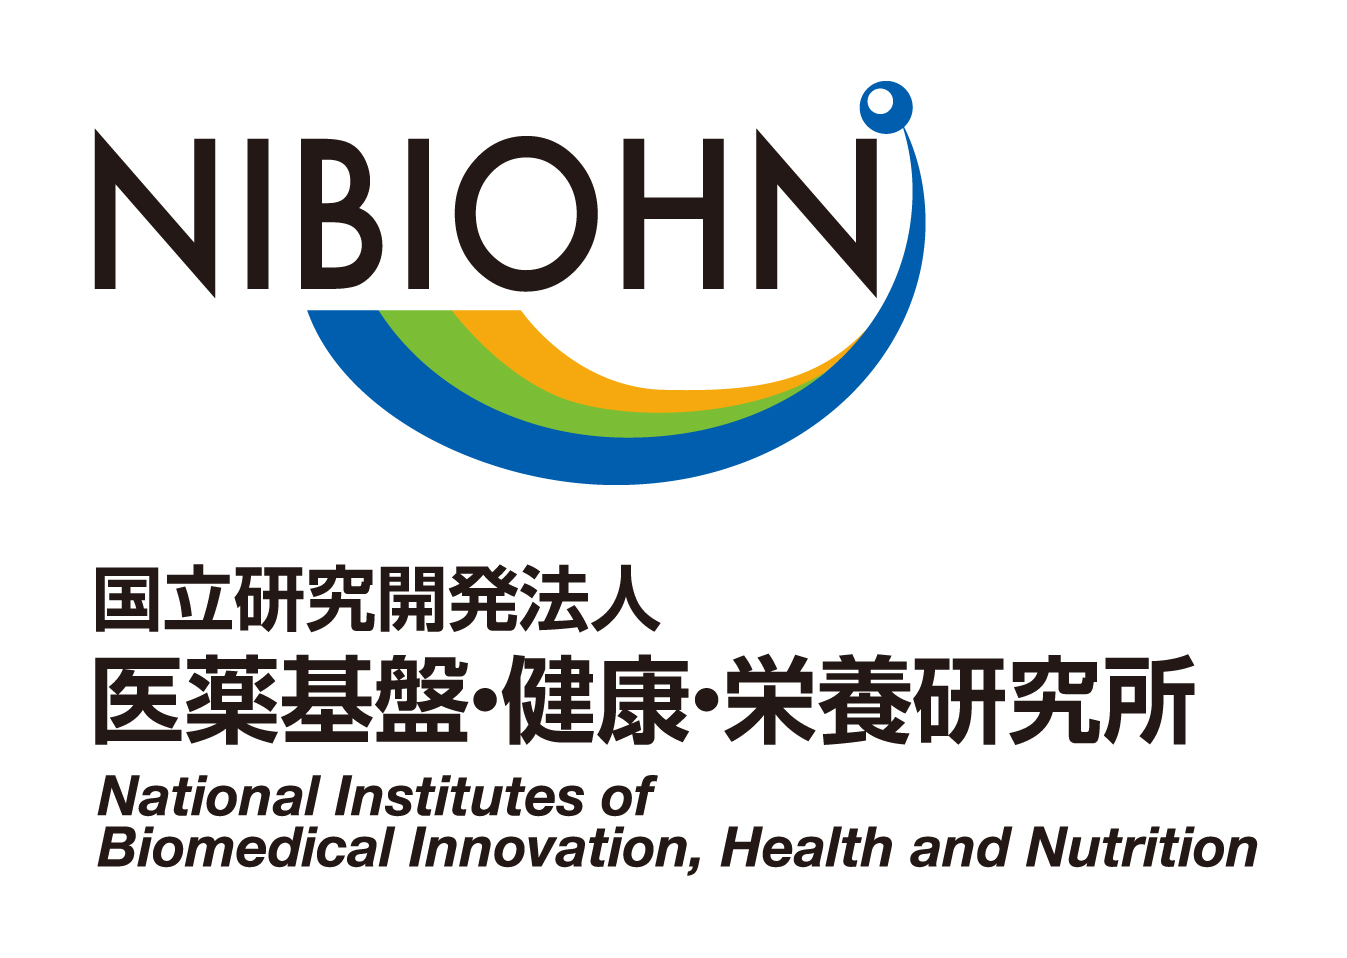 National Institutes of Biomedical Innovation, Health and Nutrition